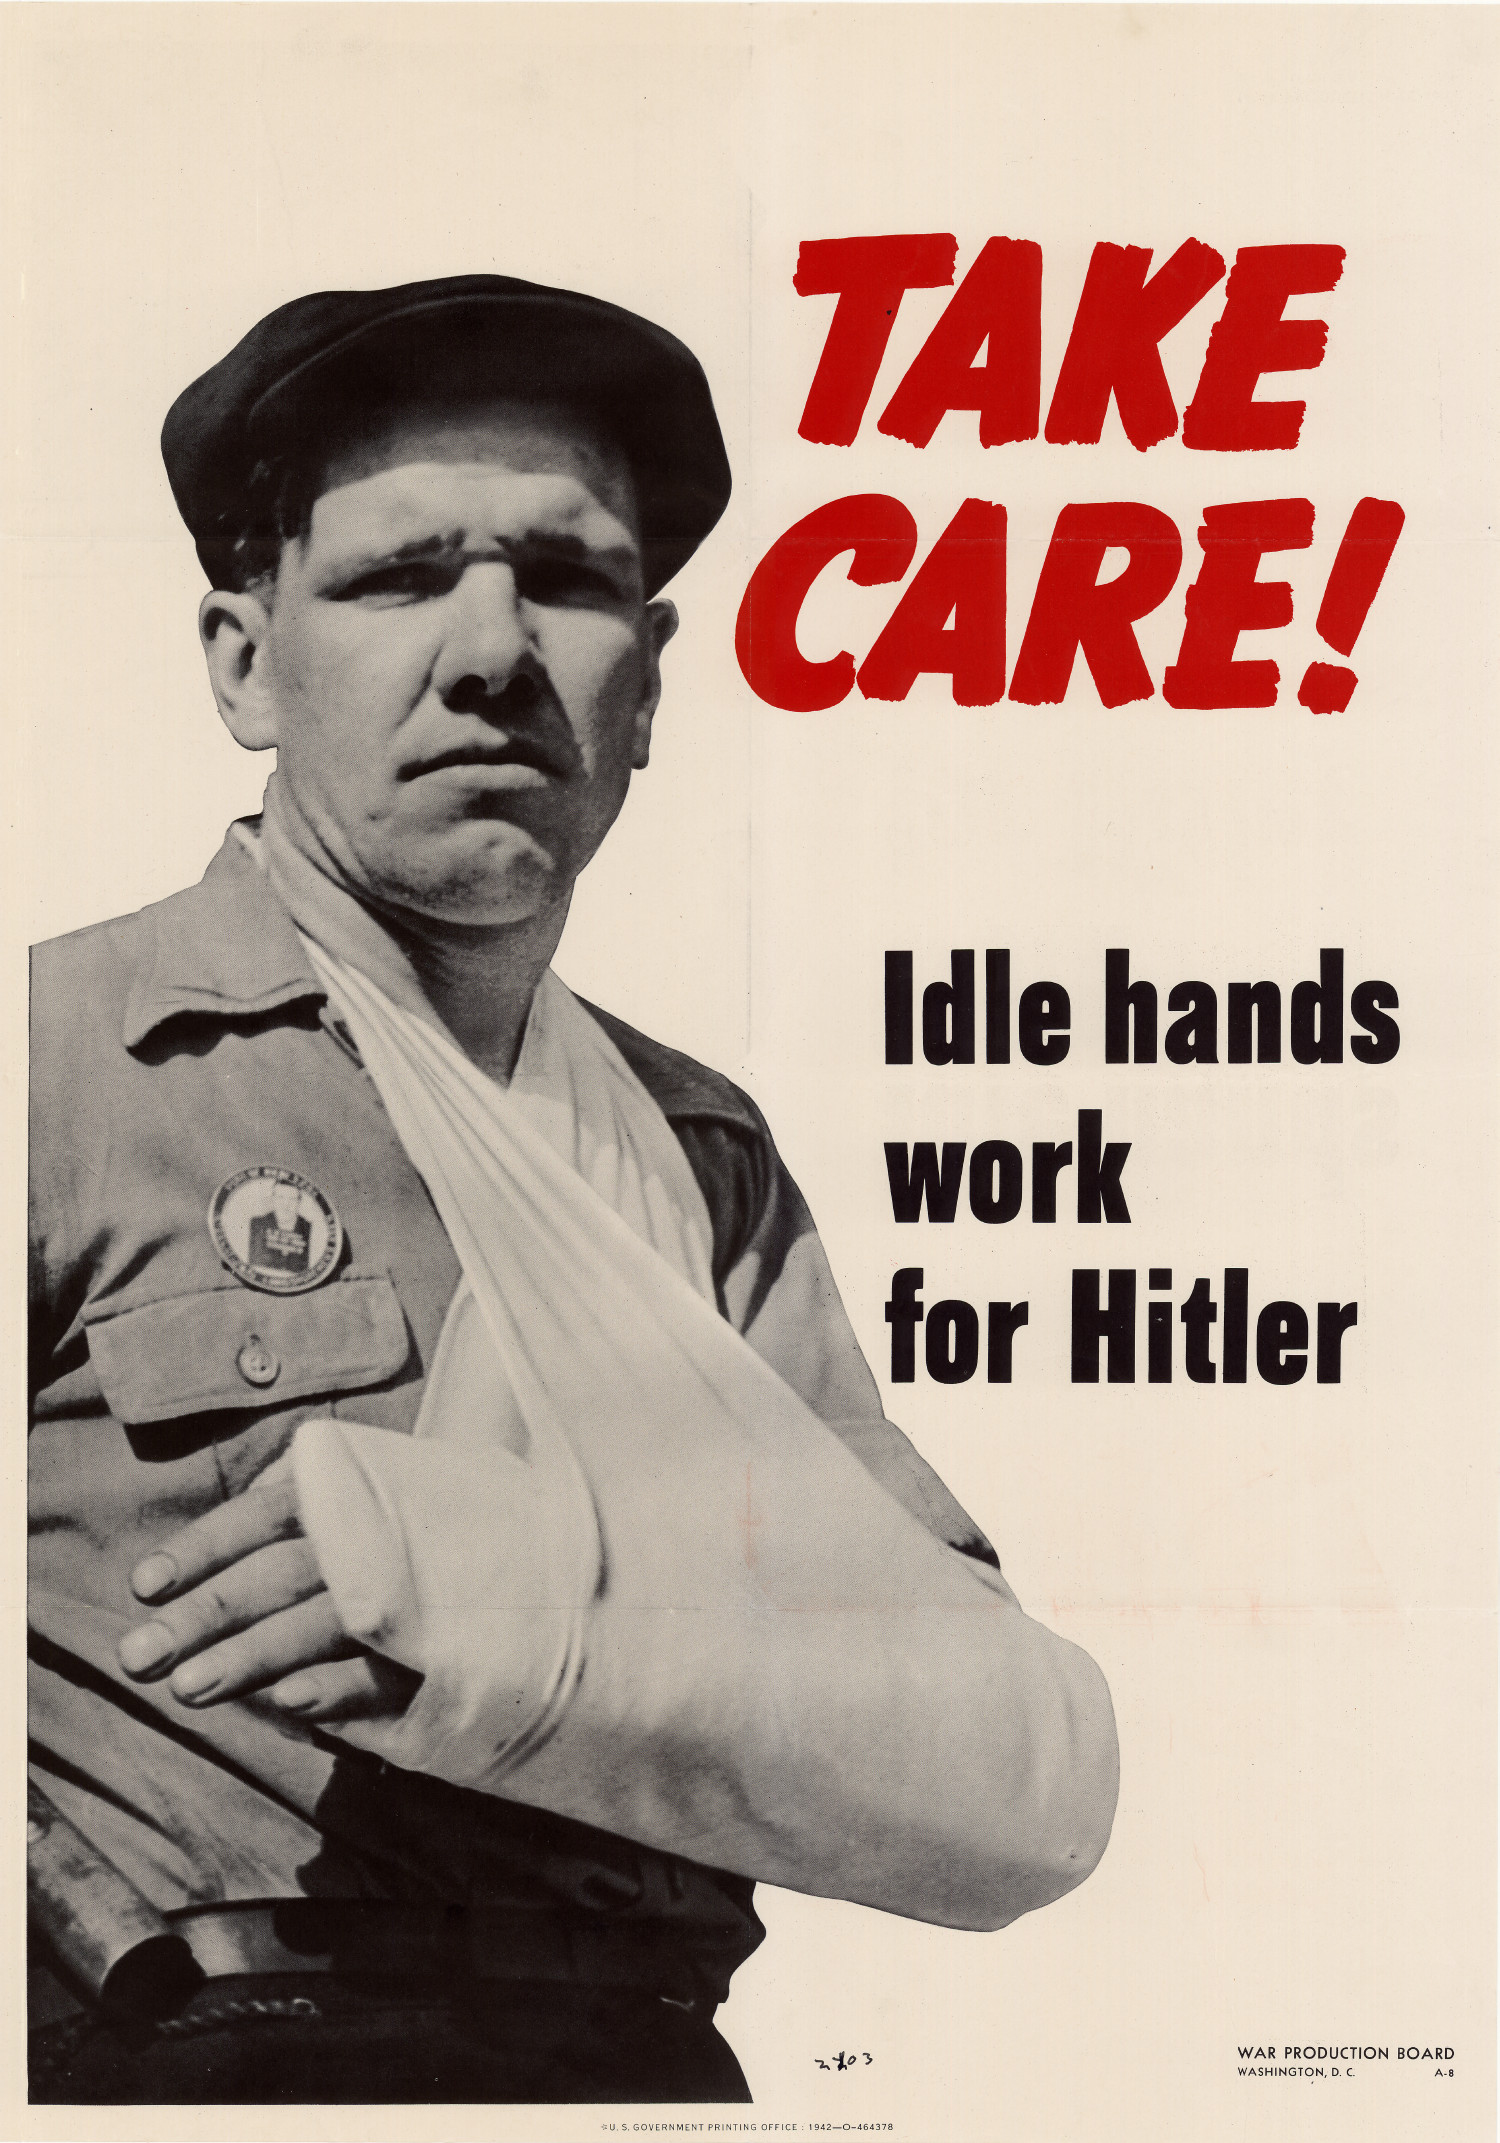 Take care! : idle work - UNT Digital Library